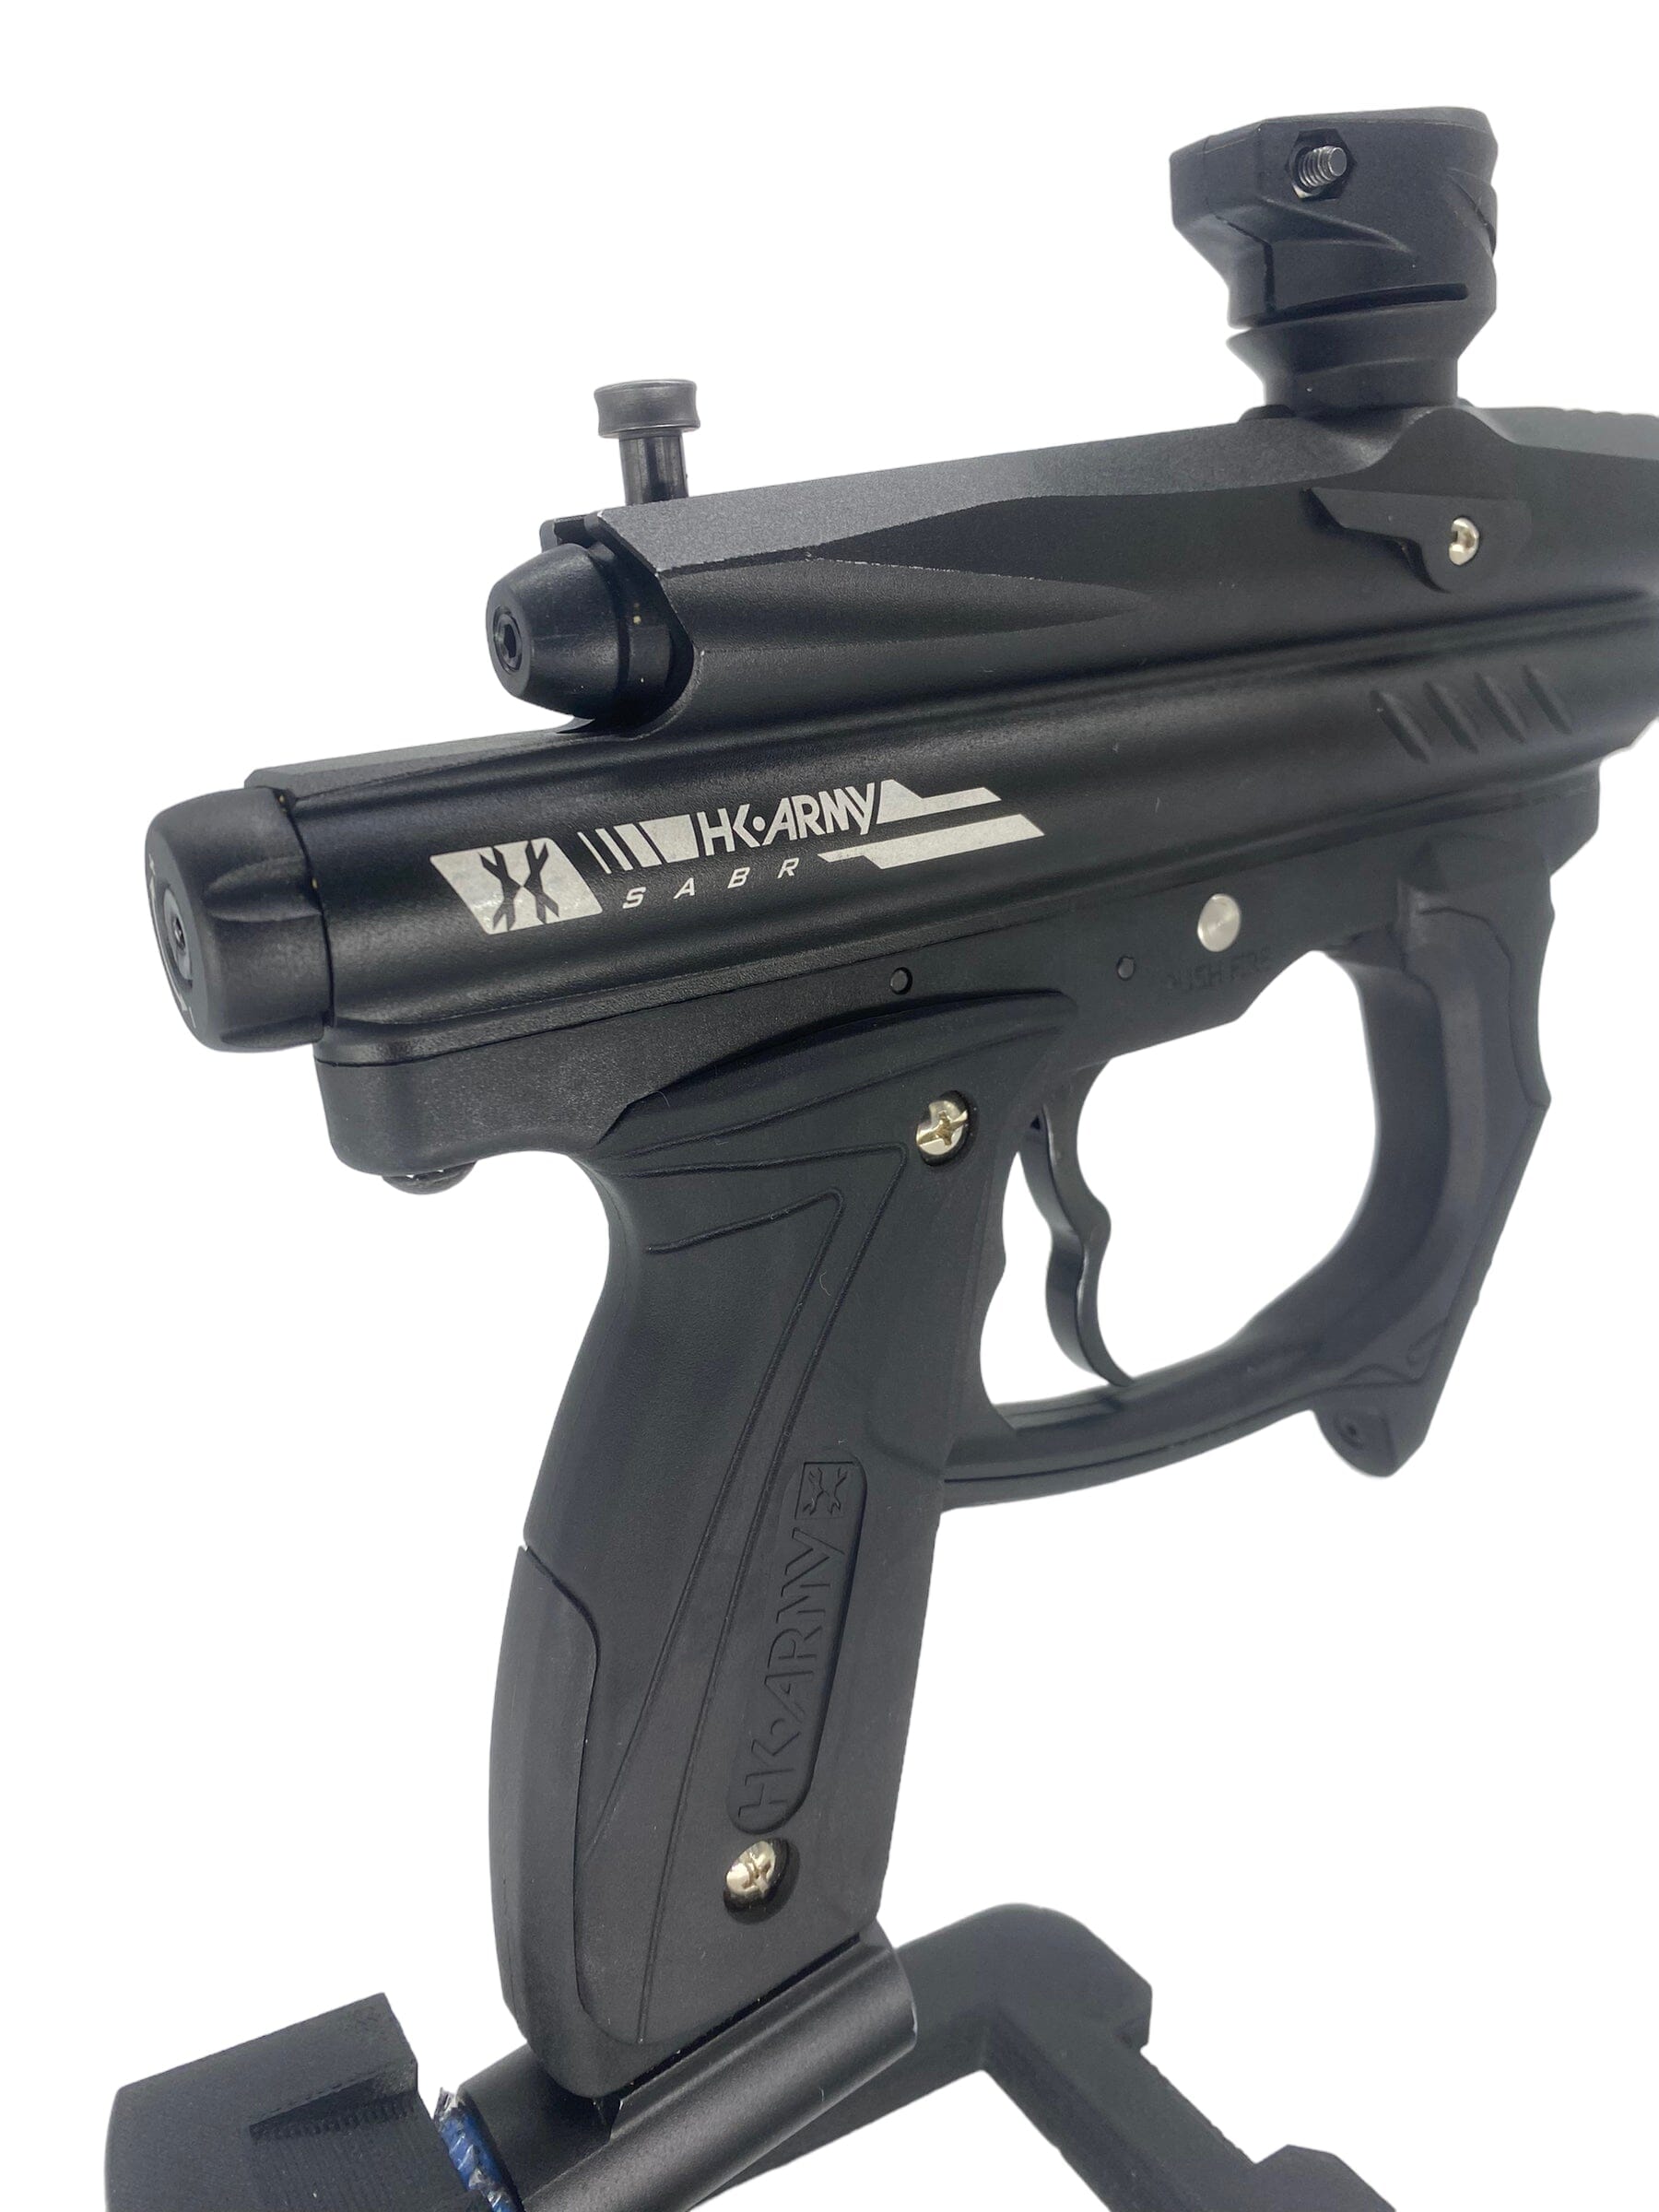 Used Hk Army Sabr Paintball Gun from CPXBrosPaintball Buy/Sell/Trade Paintball Markers, Paintball Hoppers, Paintball Masks, and Hormesis Headbands